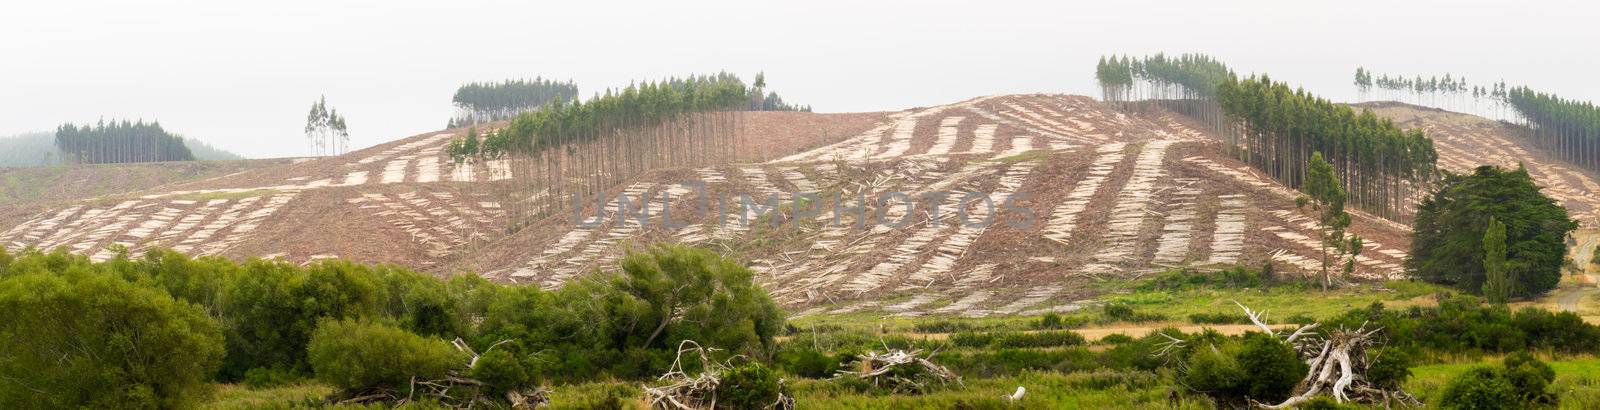 Panoramic view of deforested hillside by clearcutting mature Eucalyptus forest for timber harvesttimber